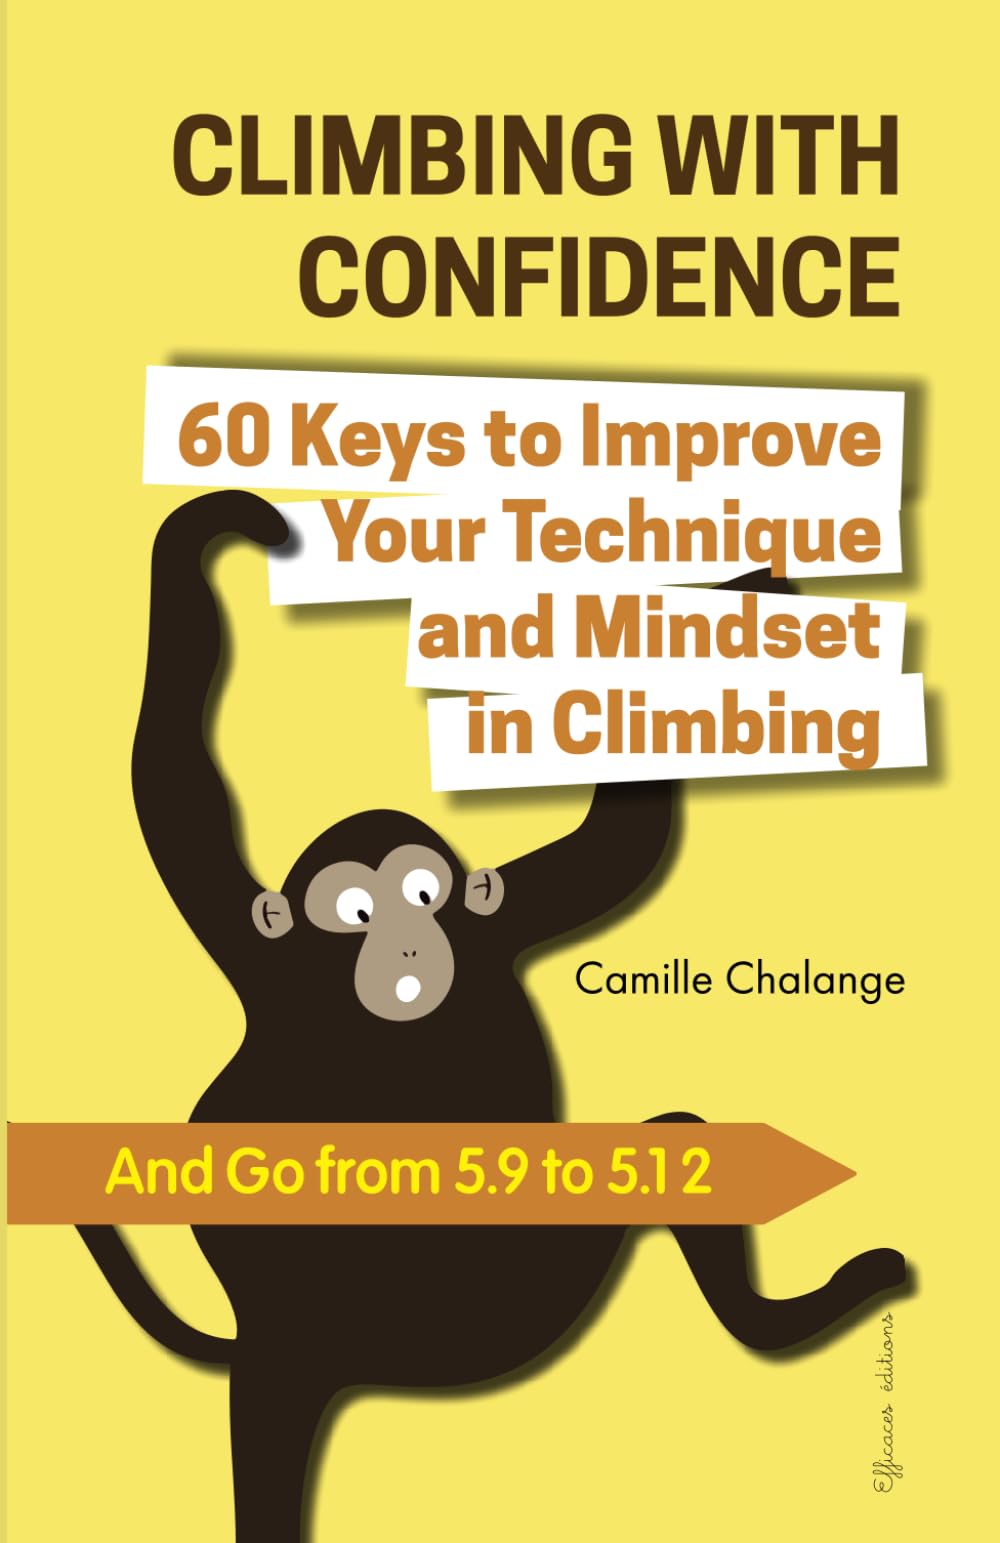 CLIMBING WITH CONFIDENCE - 60 Keys to Improve Your Technique and Mindset in Climbing: And Go from 5.9 to 5.12 (CLIMBING PROGRESSION)